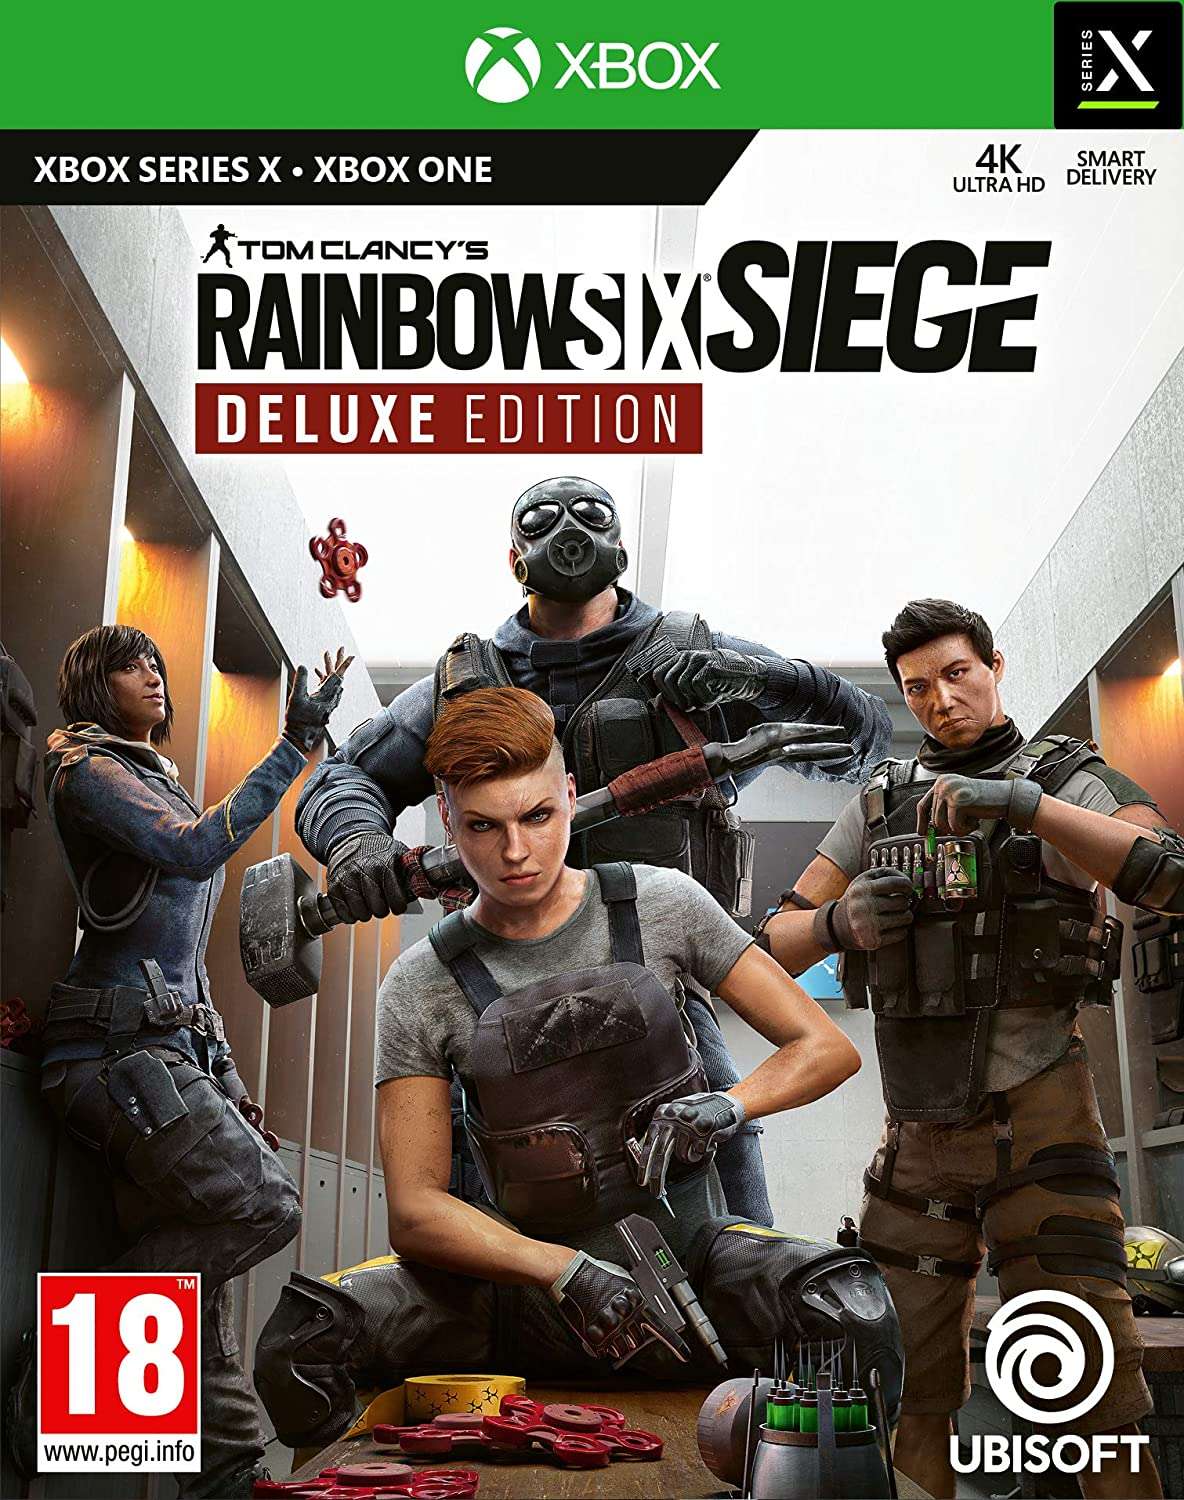 Tom Clancys Rainbow Six Siege Deluxe Edition for XBOXSERIESX to buy